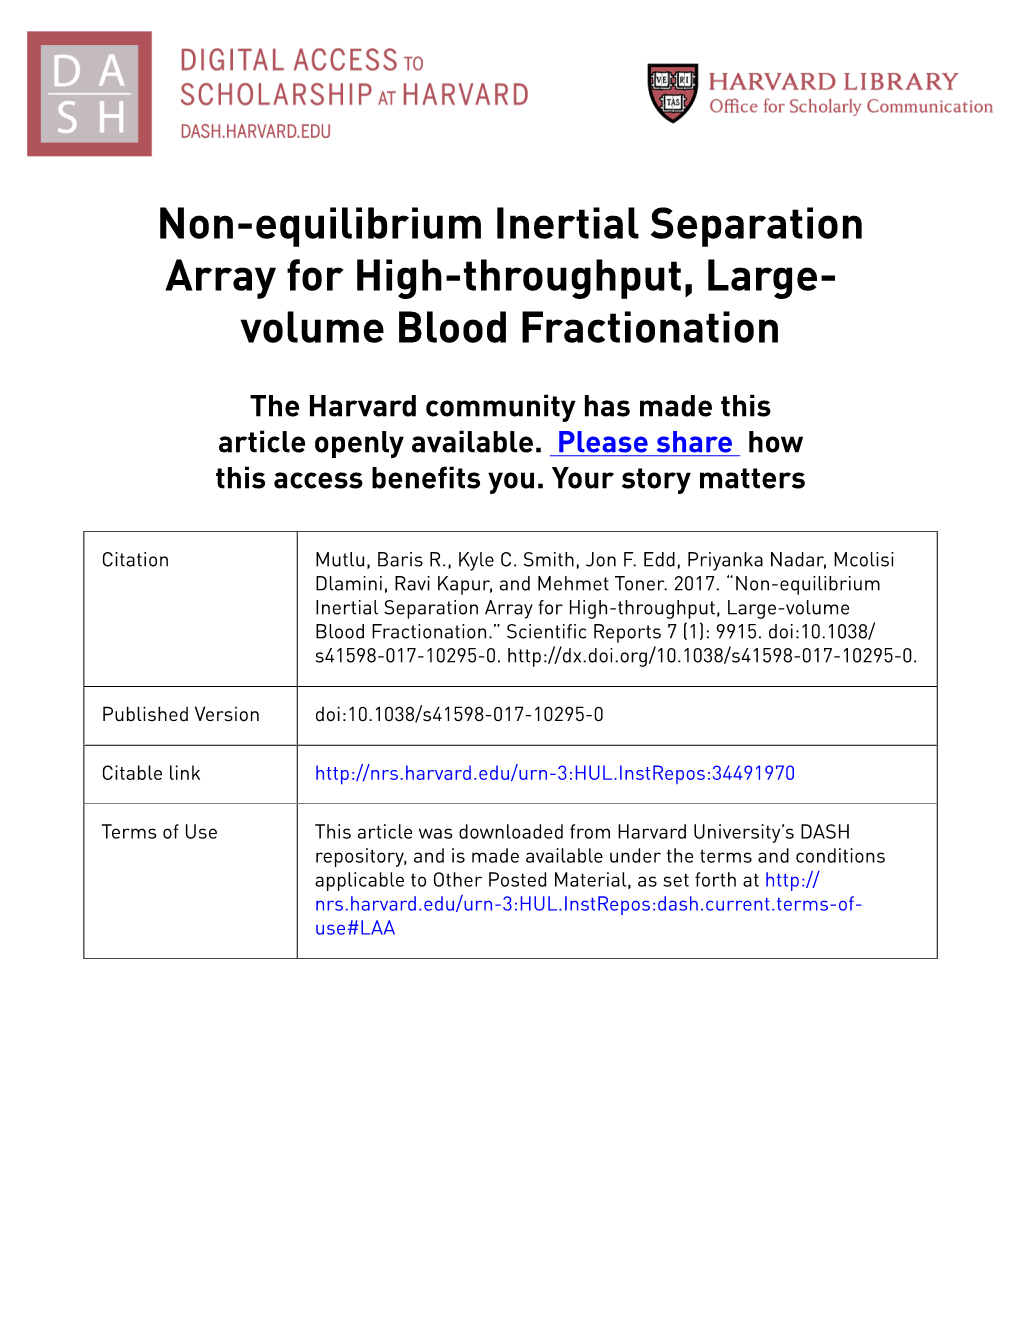 Non-Equilibrium Inertial Separation Array for High-Throughput, Large- Volume Blood Fractionation